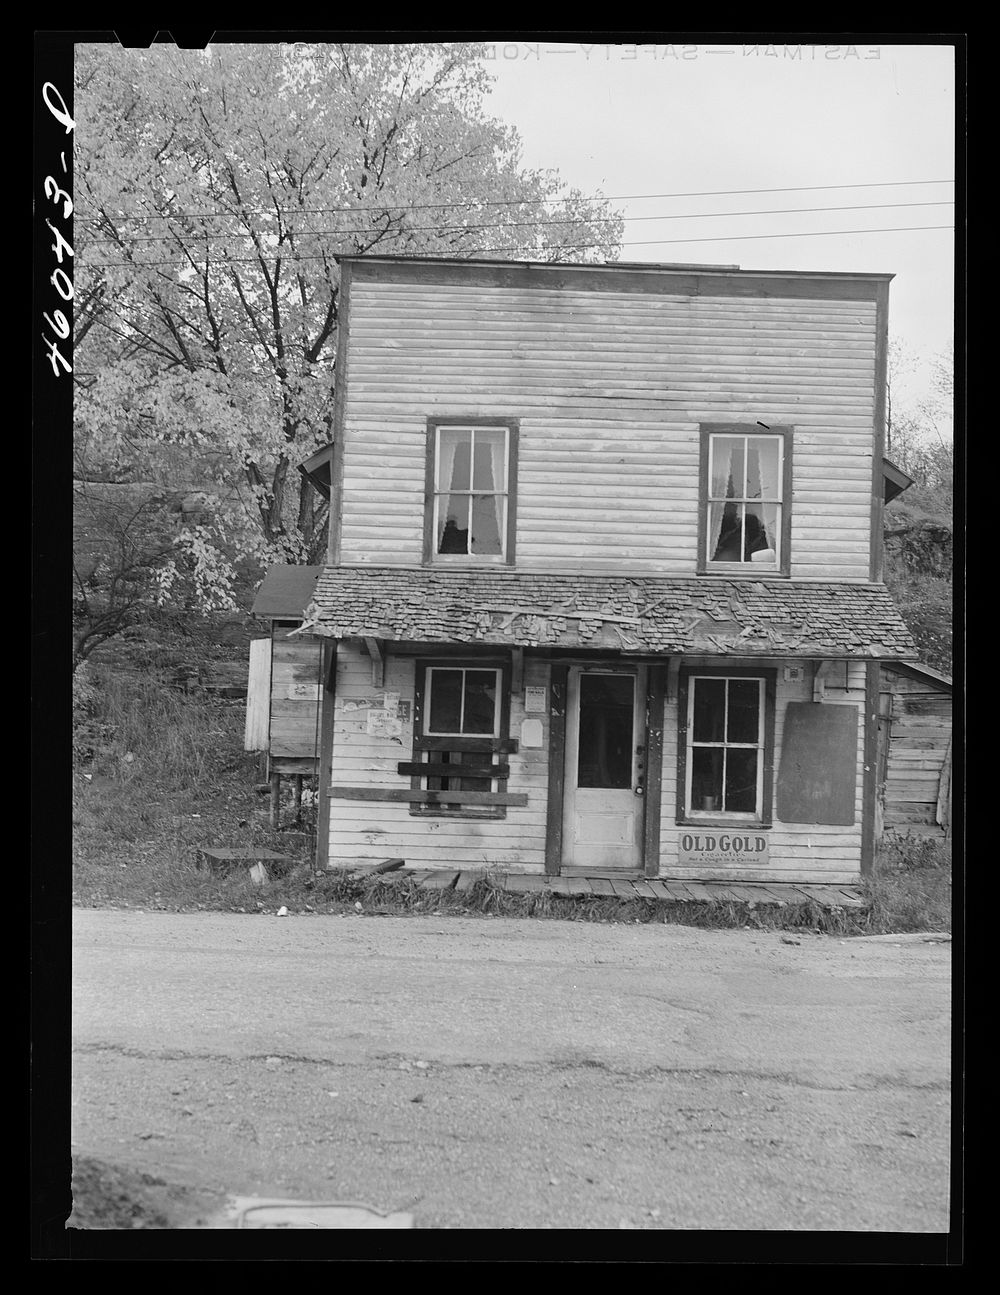 Abandoned store in the village of Lewisburg, New York. Everyone has now left the town which was in the Pine Camp expansion…